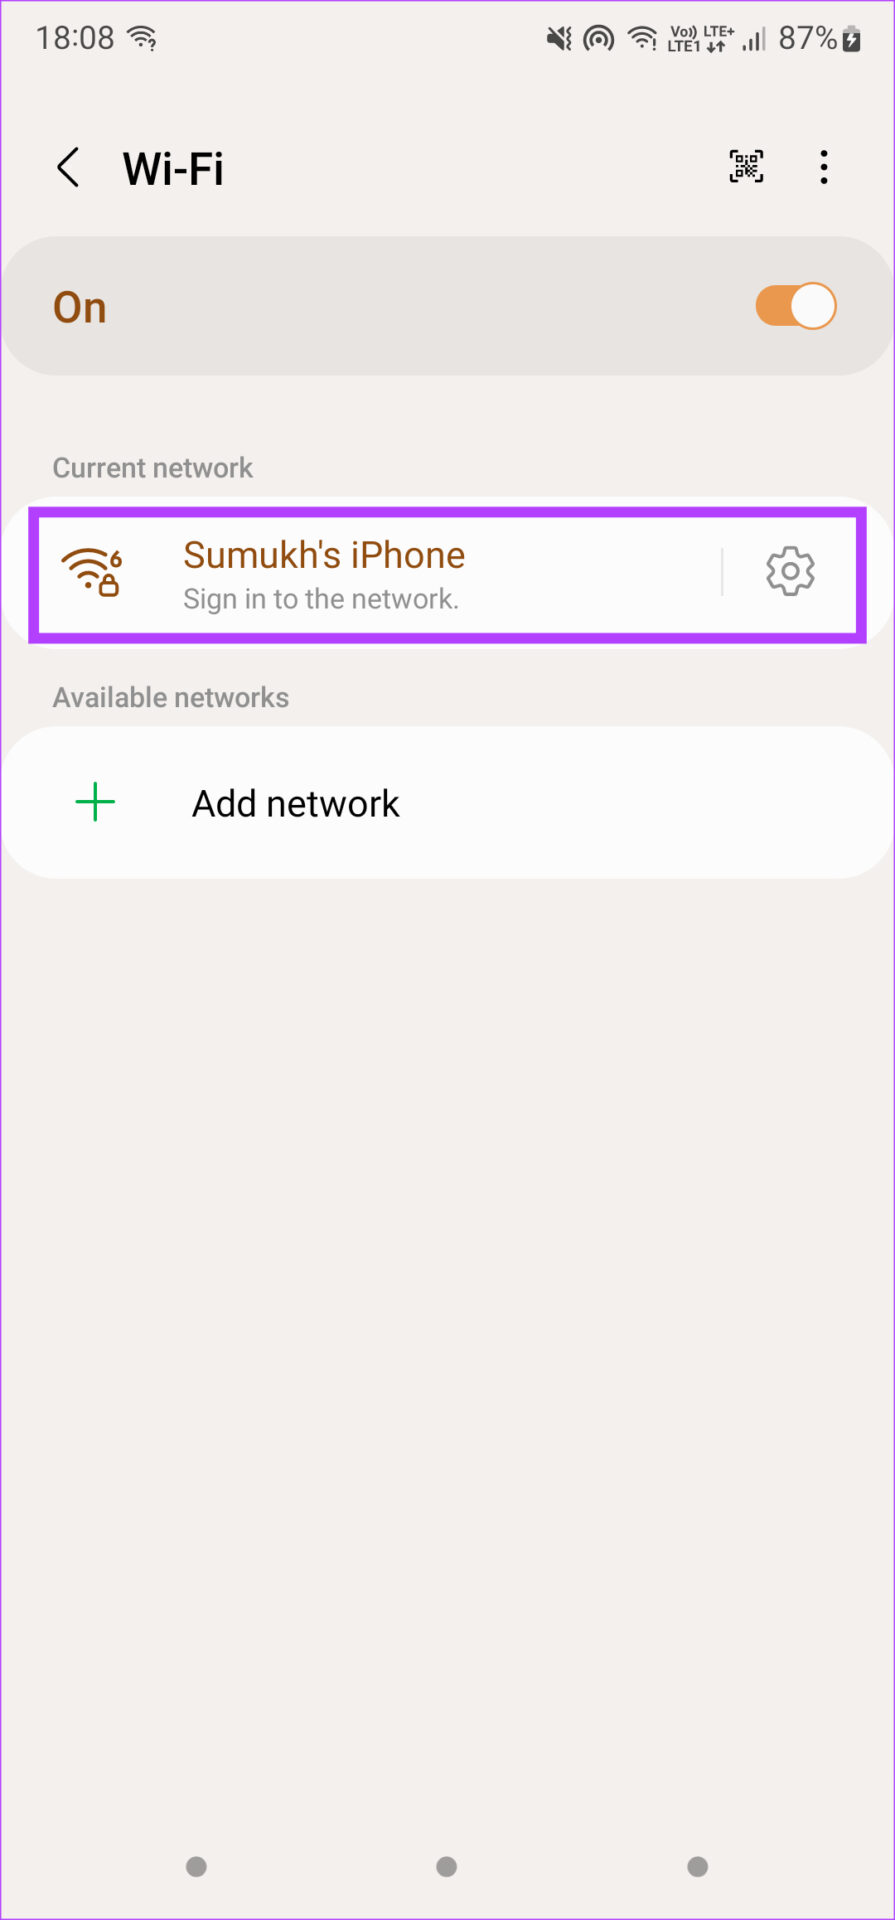 Connect to Wi-Fi network